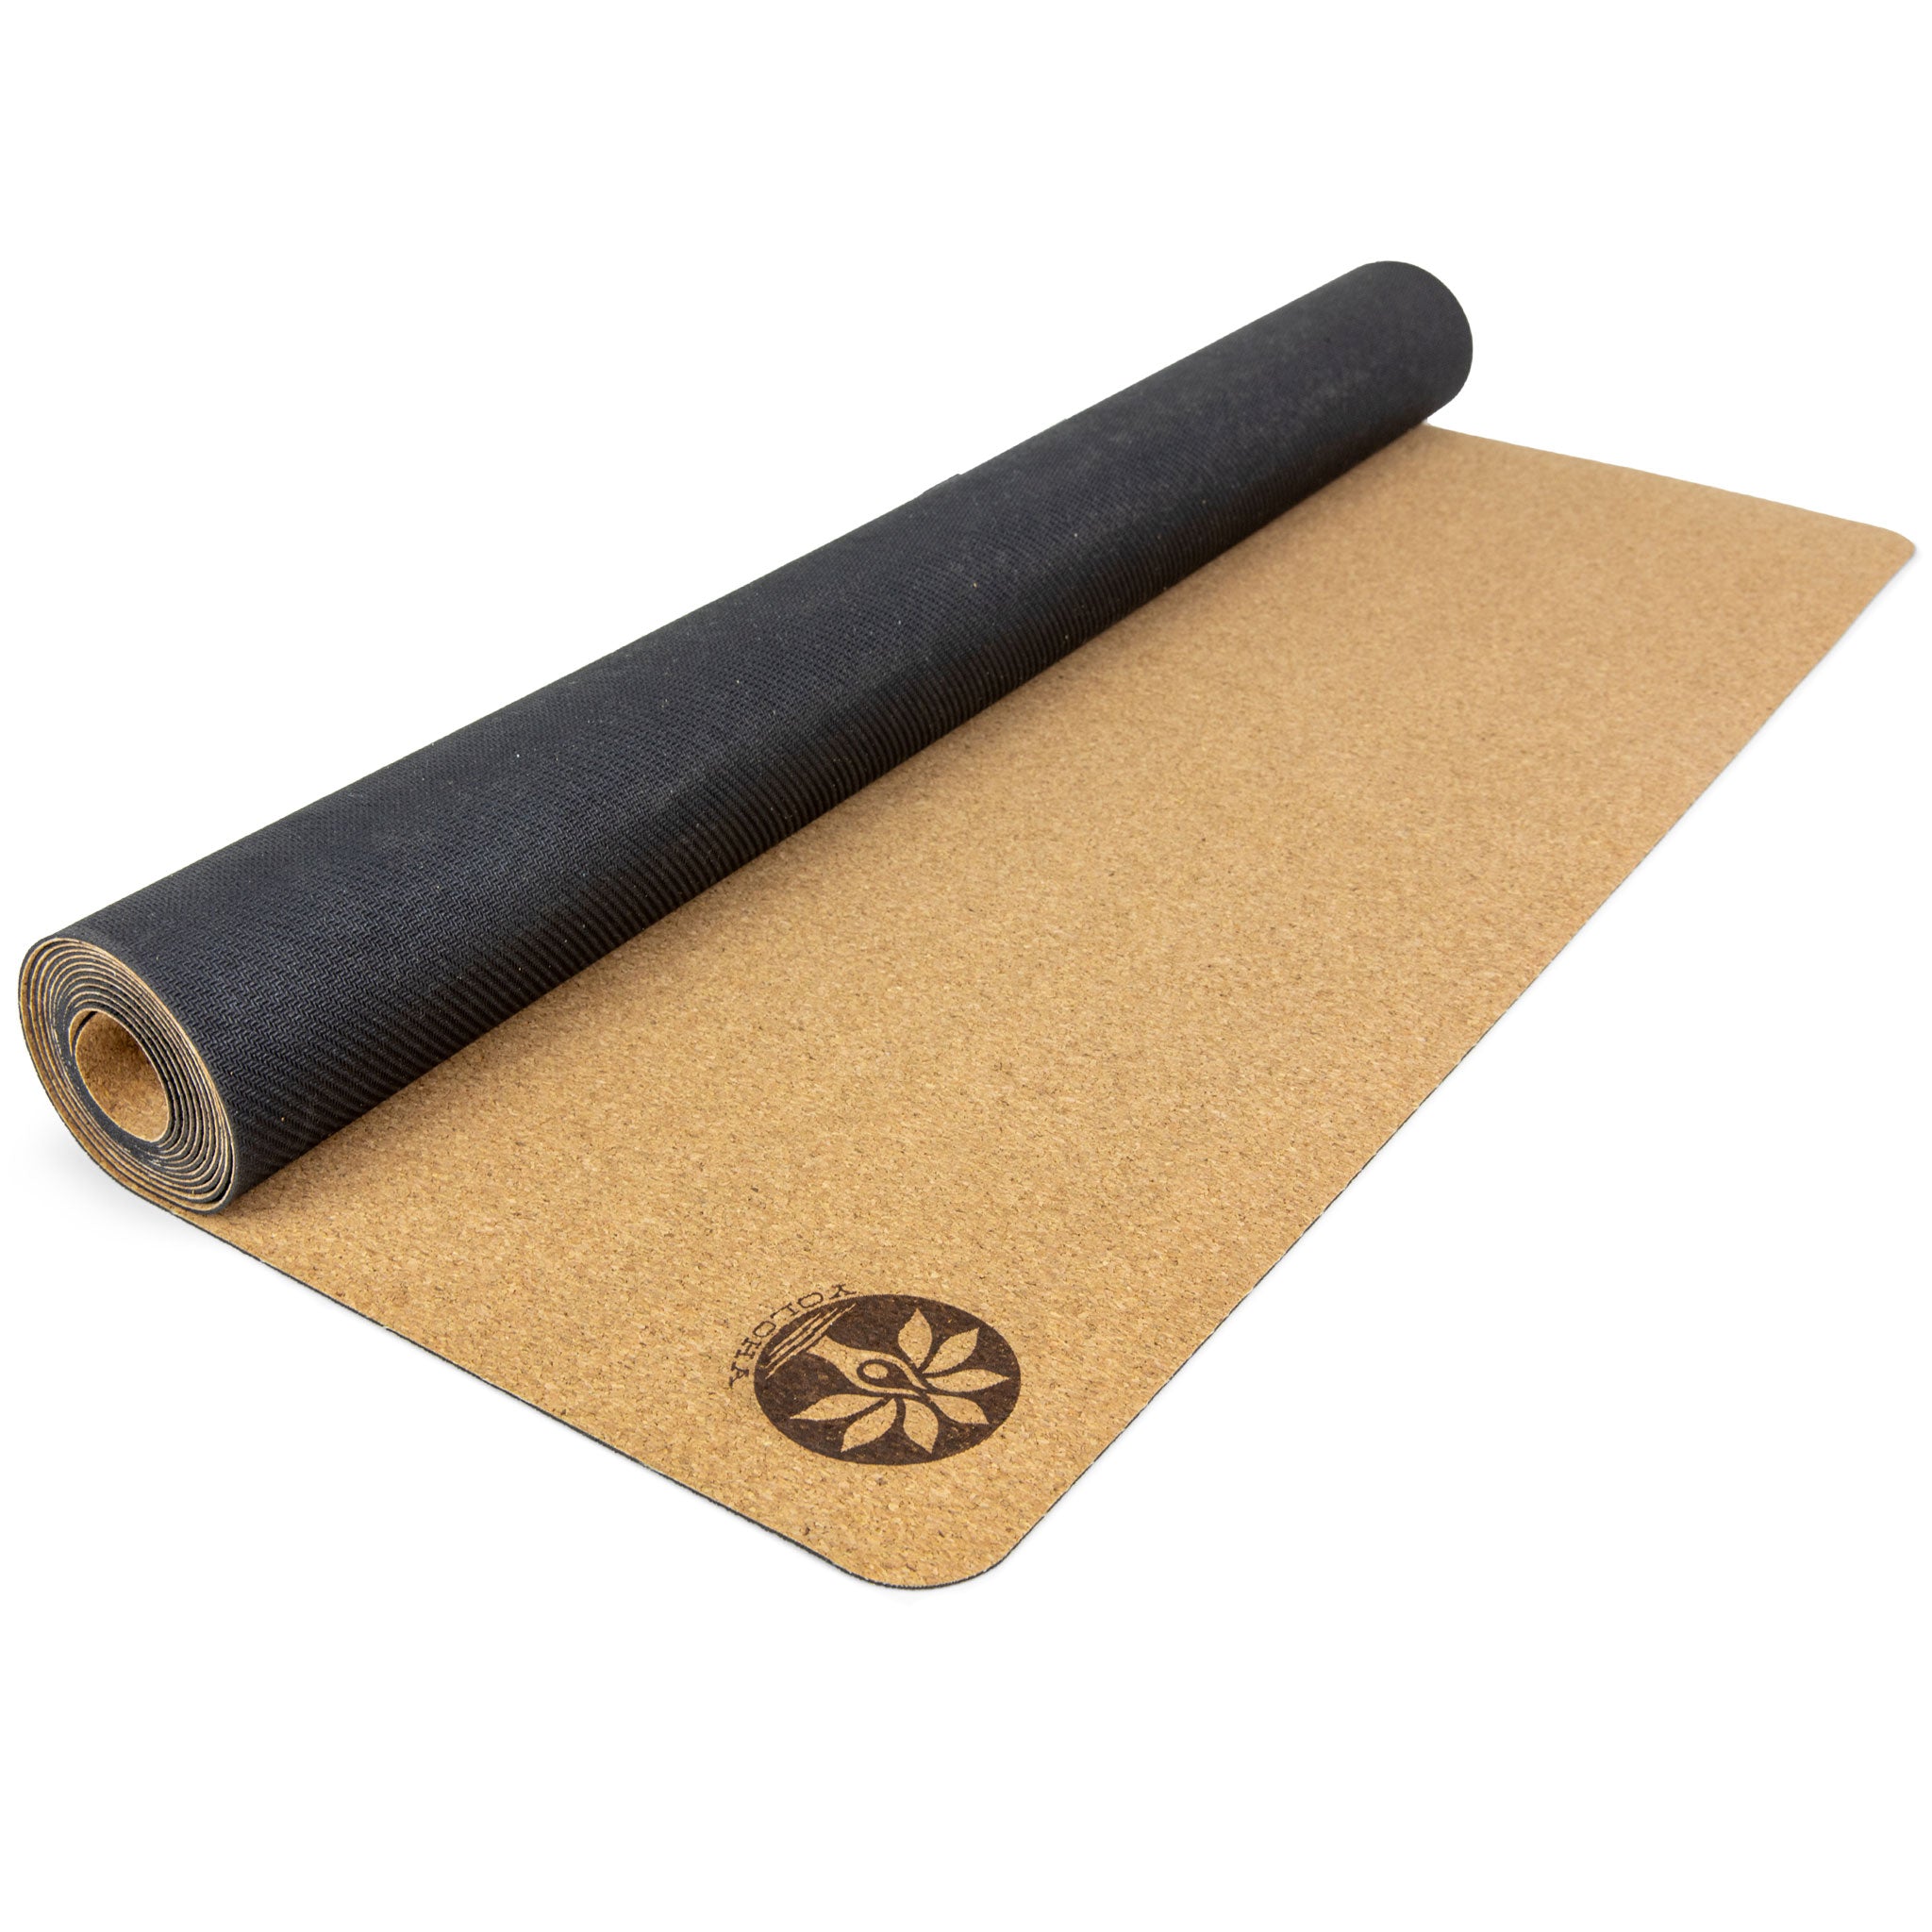 Keeps Your Mat Dry Cork Premium Yoga Mat Bag, Clean and Portable - Strong,  Sustainable, Soft, Durable, Moisture Resistant, Premium, Handmade Wyz15187  - China Moisture Resistant and Bag price